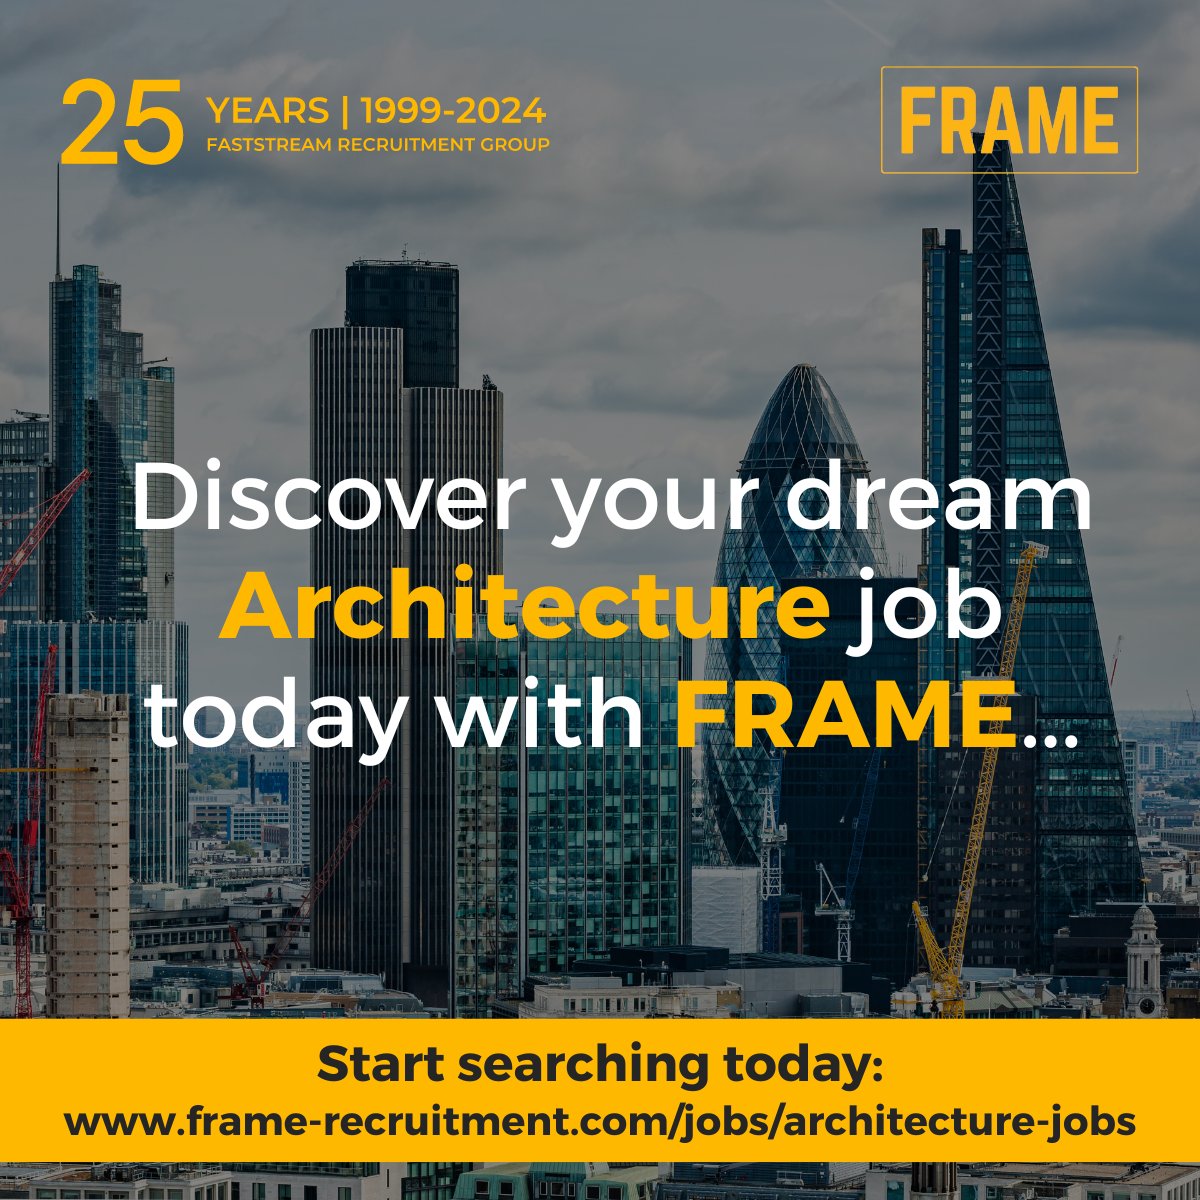 Are you a visionary architect ready to tackle the next big challenge? Seeking projects that ignite your passion and drive change? Look no further. Explore the hottest architecture jobs here frame-recruitment.com/jobs/architect… #ArchitectsWanted #ArchitectureJobs #FRAME25 #FaststreamGroup25